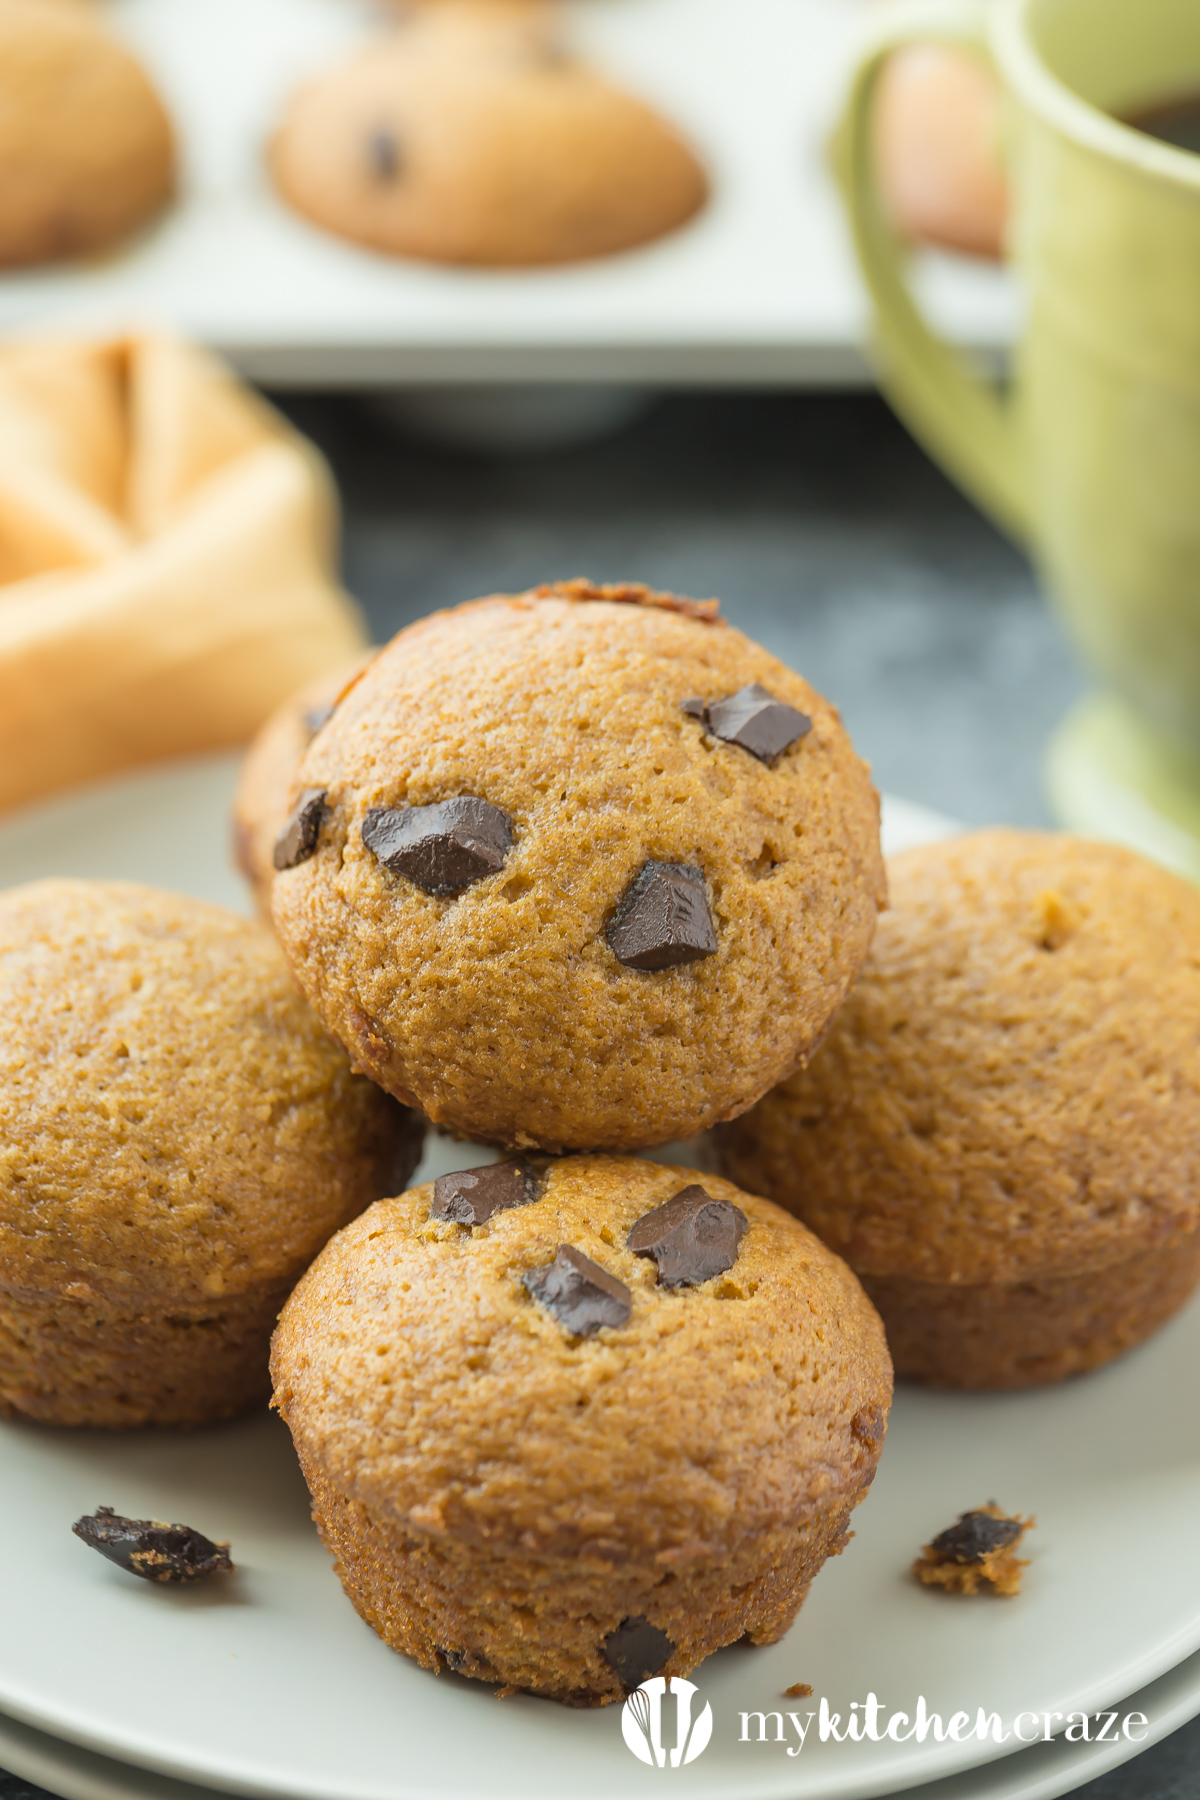 Wake up to a delicious cup of coffee and these moist, flavorful and delicious Pumpkin Muffins. These muffins are perfect for fall! Make sure to grab one because they won't last long!